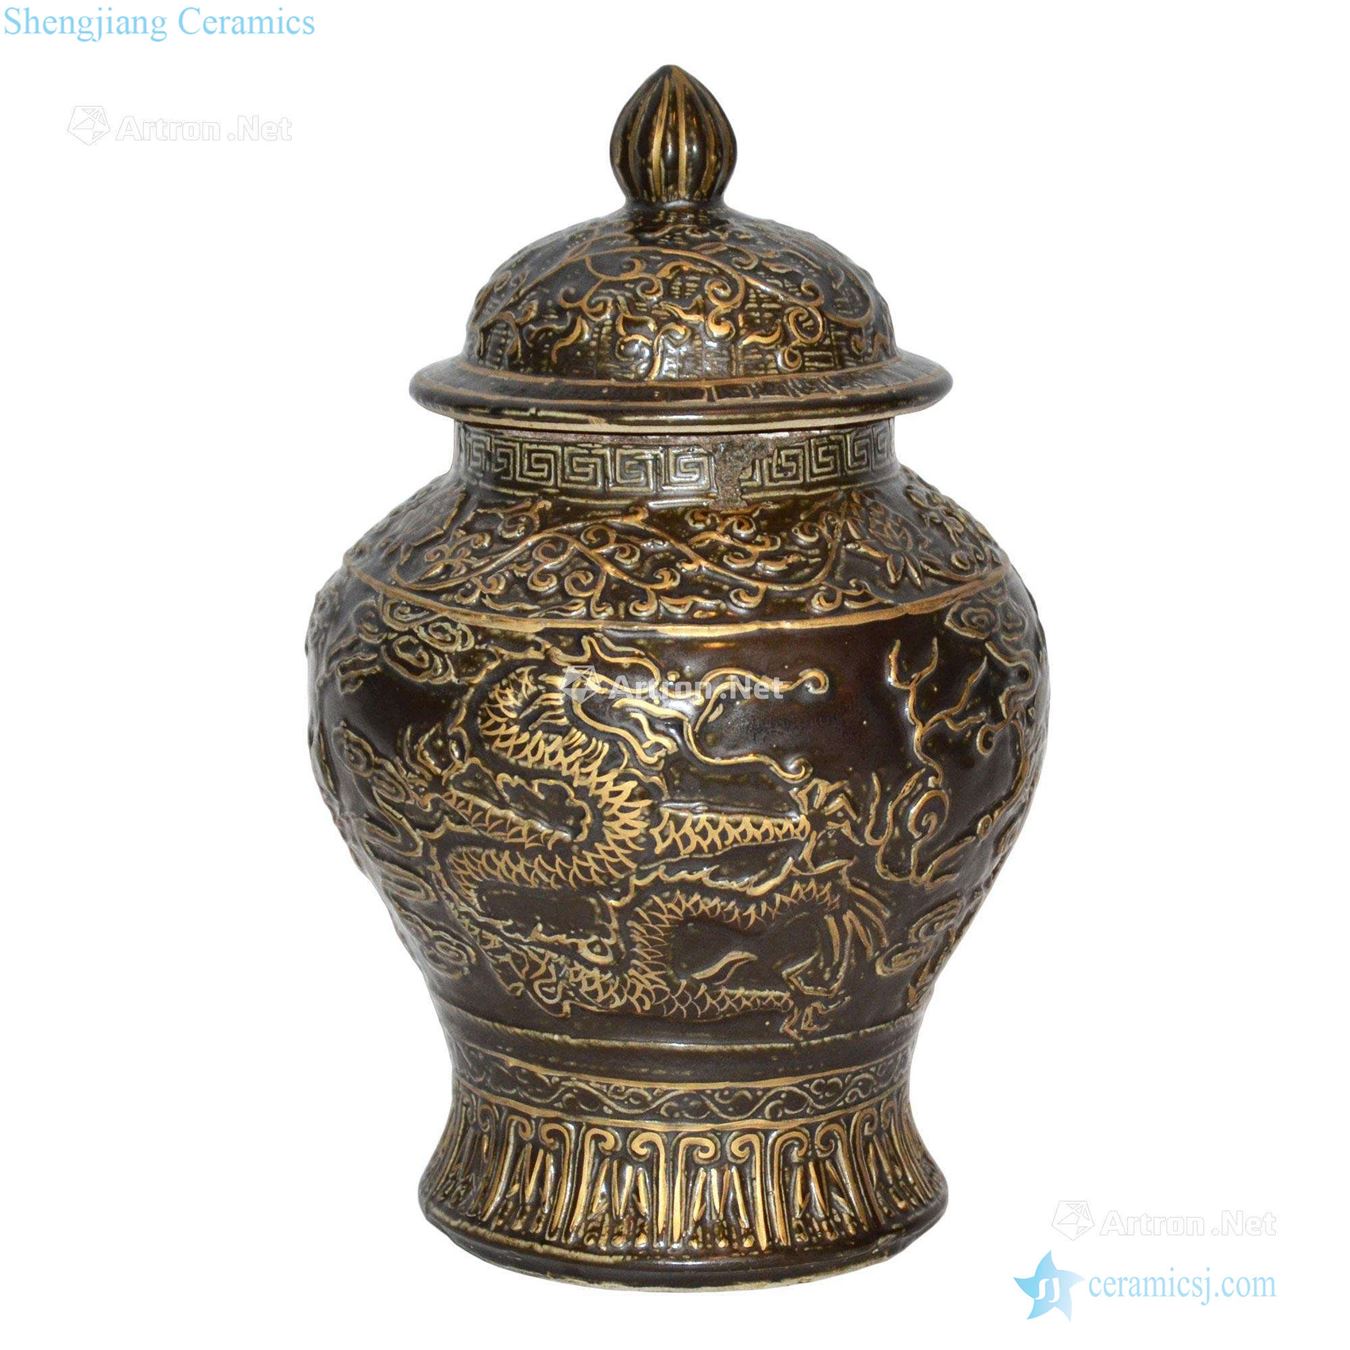 The song dynasty to build kilns ink general relief paint YunLongWen flower pot